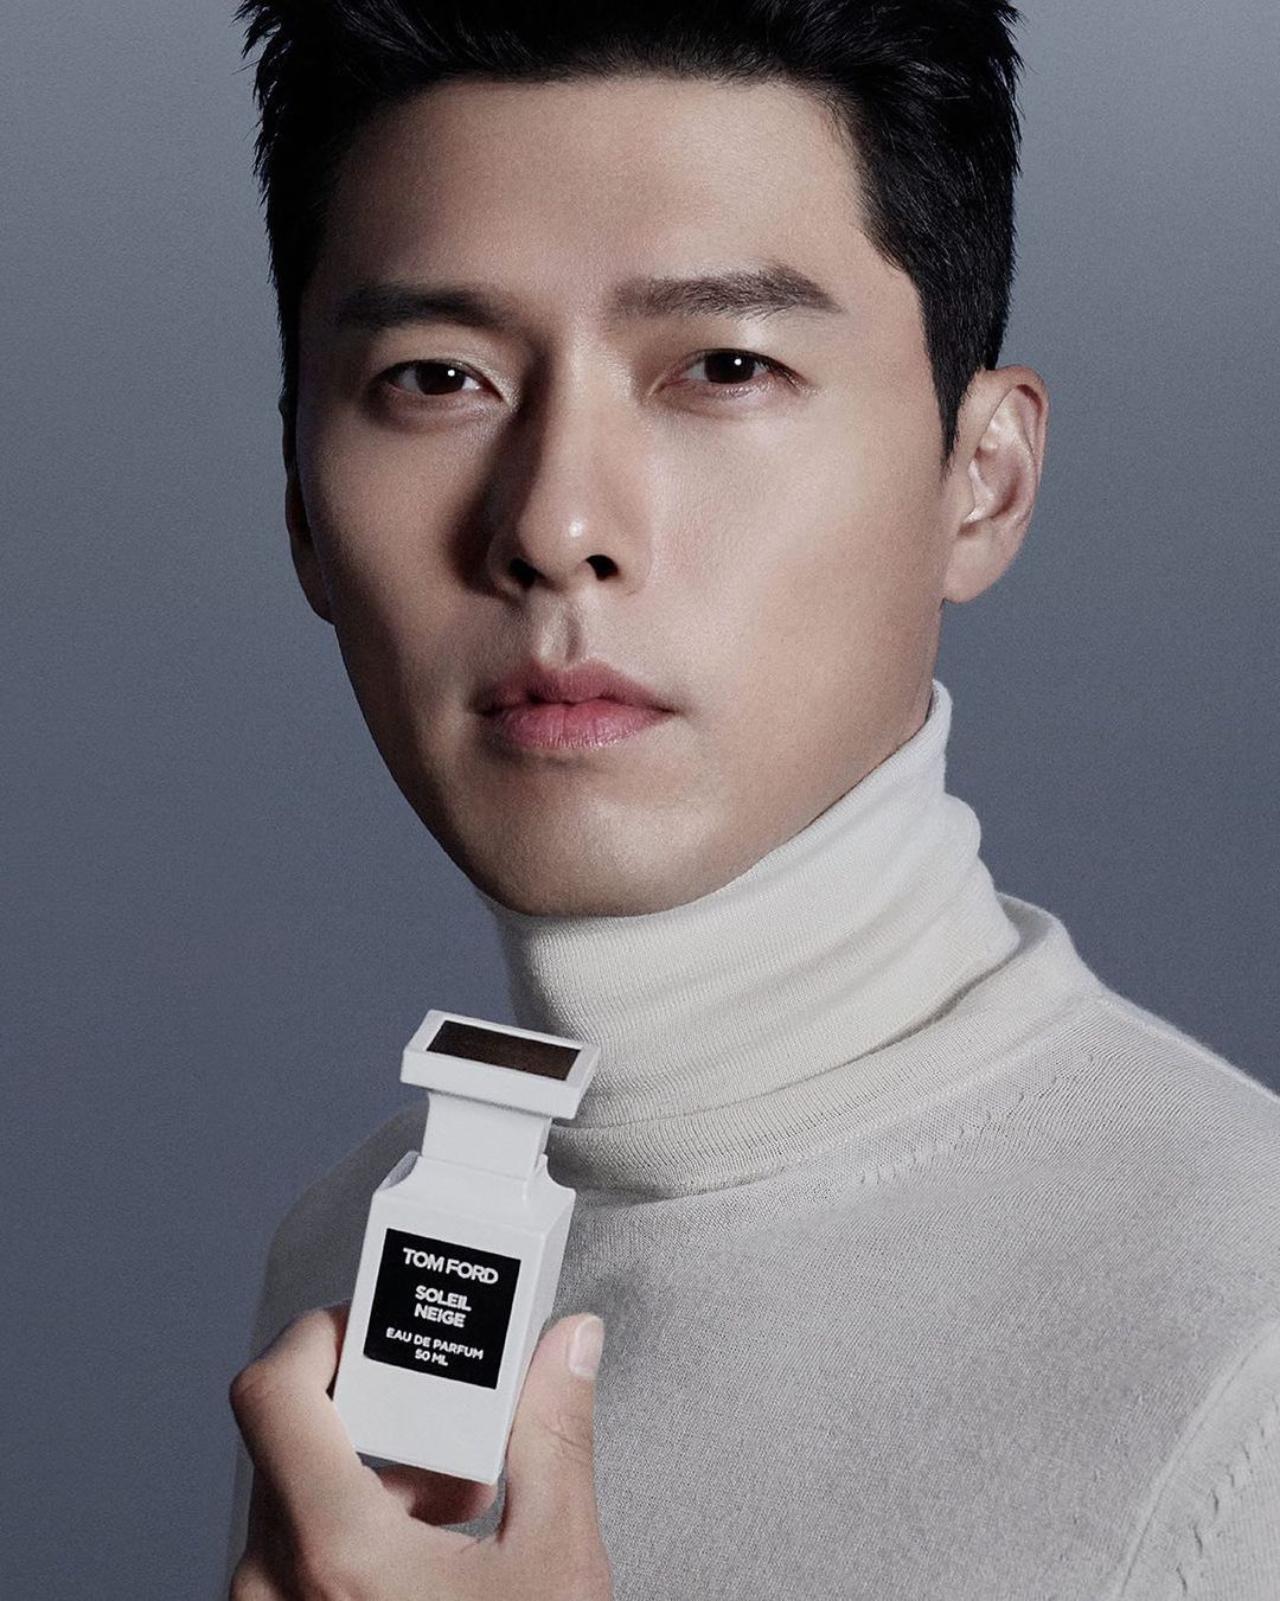 Hyun-Bin for Loro Piana and Omega
Whether you're a Korean entertainment veteran or just dipping your toes into this fascinating world, it's impossible to not have heard the name of 'Crash Landing On You' actor Hyun Bin. The actor specially collaborated with Loro Piana for an exclusive collection of luxe hats and shoes - the line was inspired by the shared goal of Hyun Bin and the label to bring in flavour of nature and the outdoors